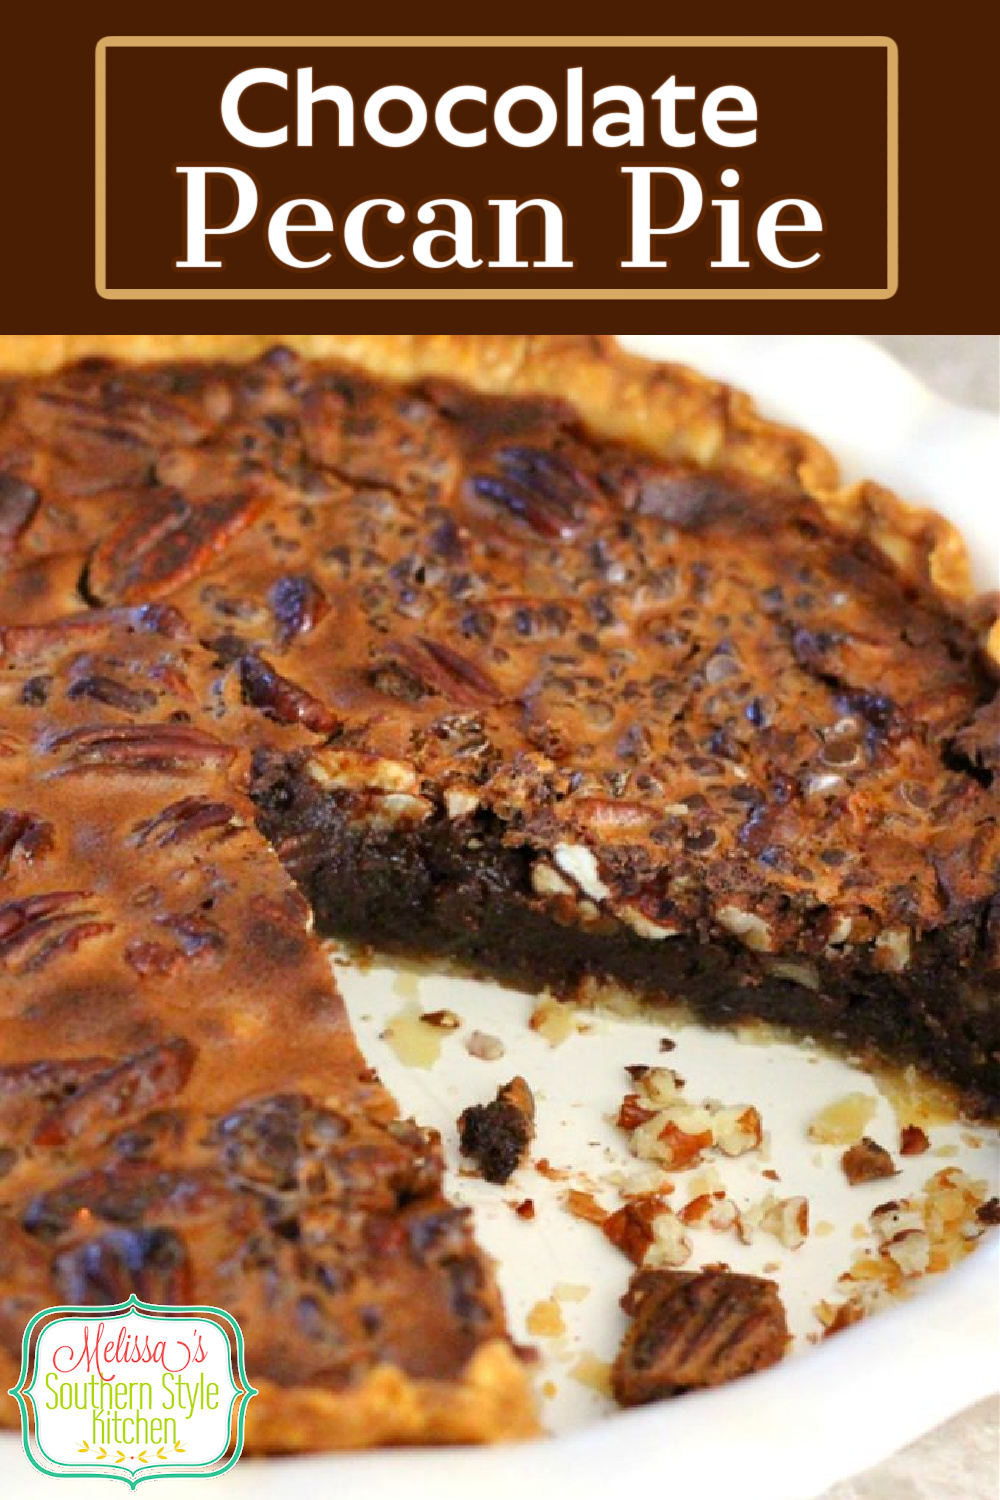 Serve this rich and fudgy Chocolate Pecan Pie for dessert #chocolate #chocolatepecanpie #pecanpie #chocolatedesserts #dessertfoodrecip#southerndesserts #southernfood #pie #pierecipes #easter #thanksgiving #christmas #newyears #holidayrecipes via @melissasssk